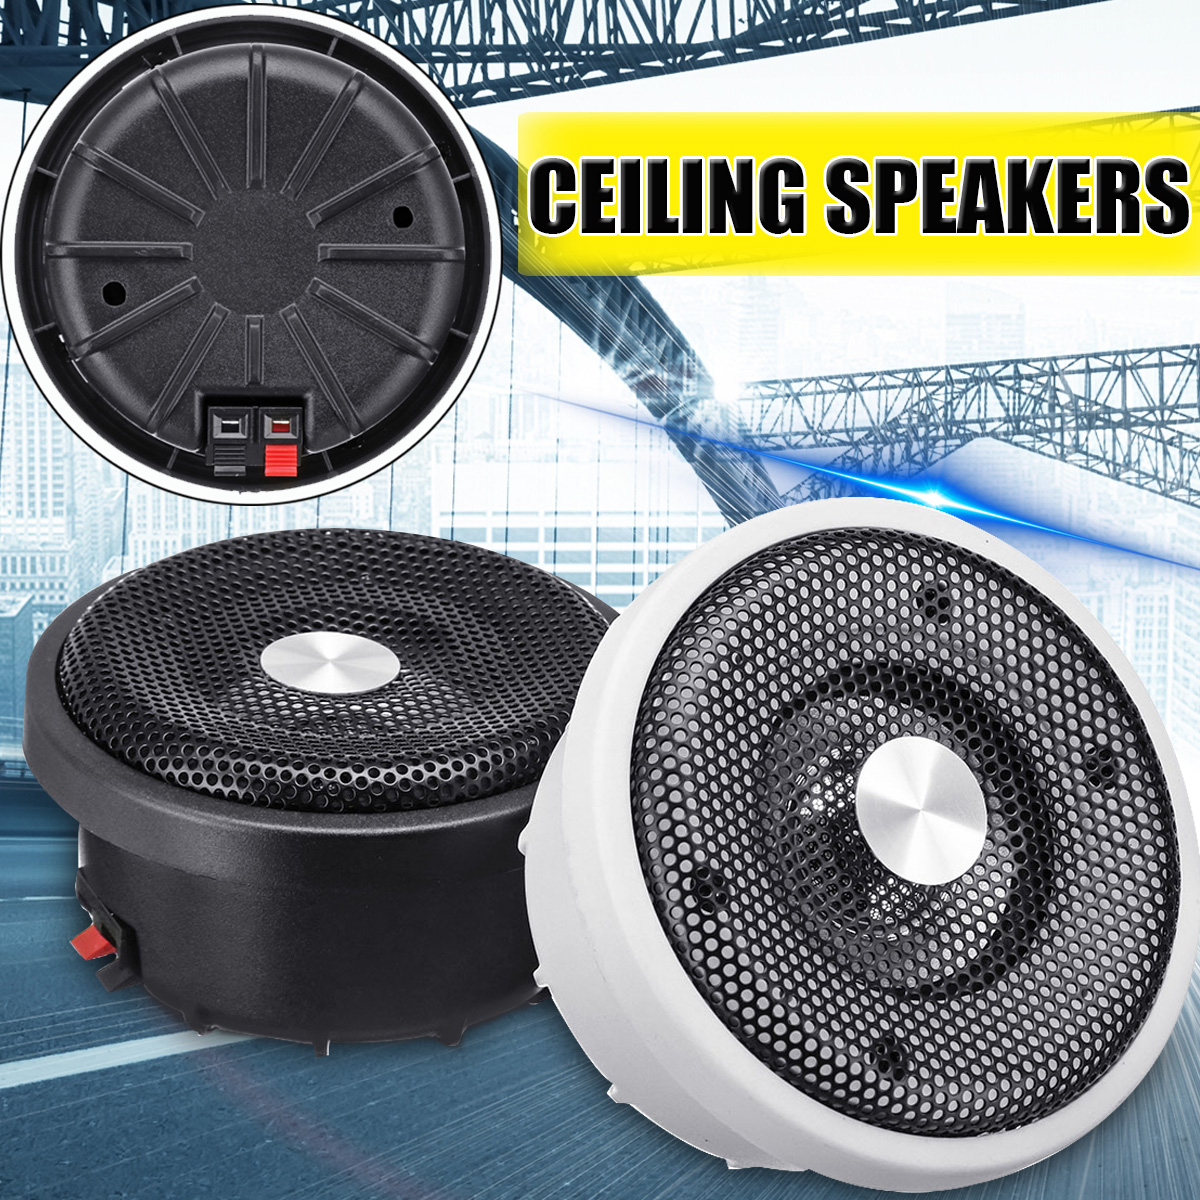 WEAH-330 Ceiling Wall Mount Speaker Stereo Sound Ceiling Home In-wall Flush Boat 